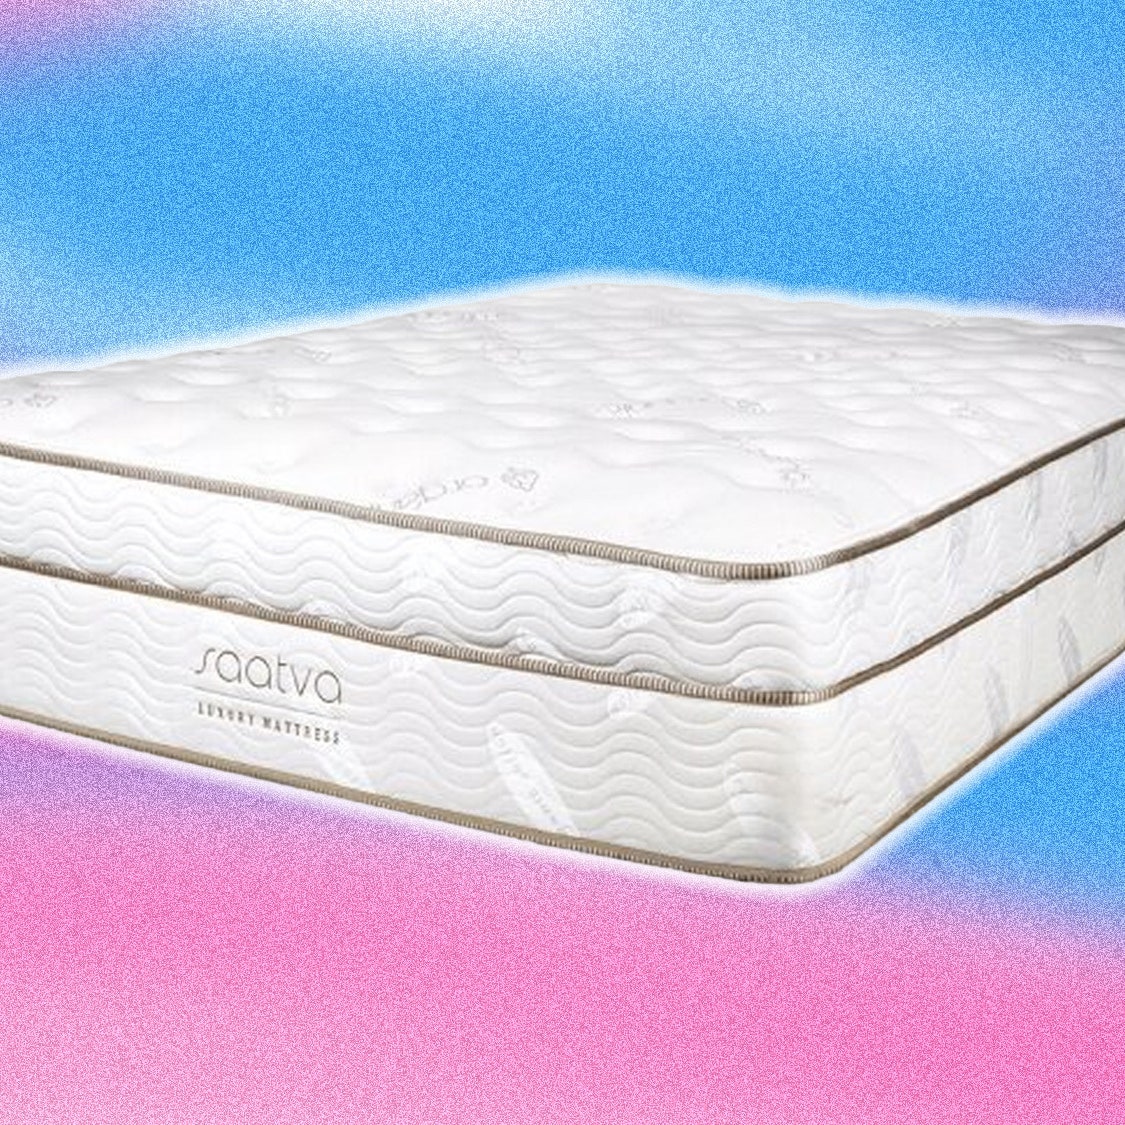 10 of the Best Memorial Day Mattress Deals, Vetted By Sleep Experts